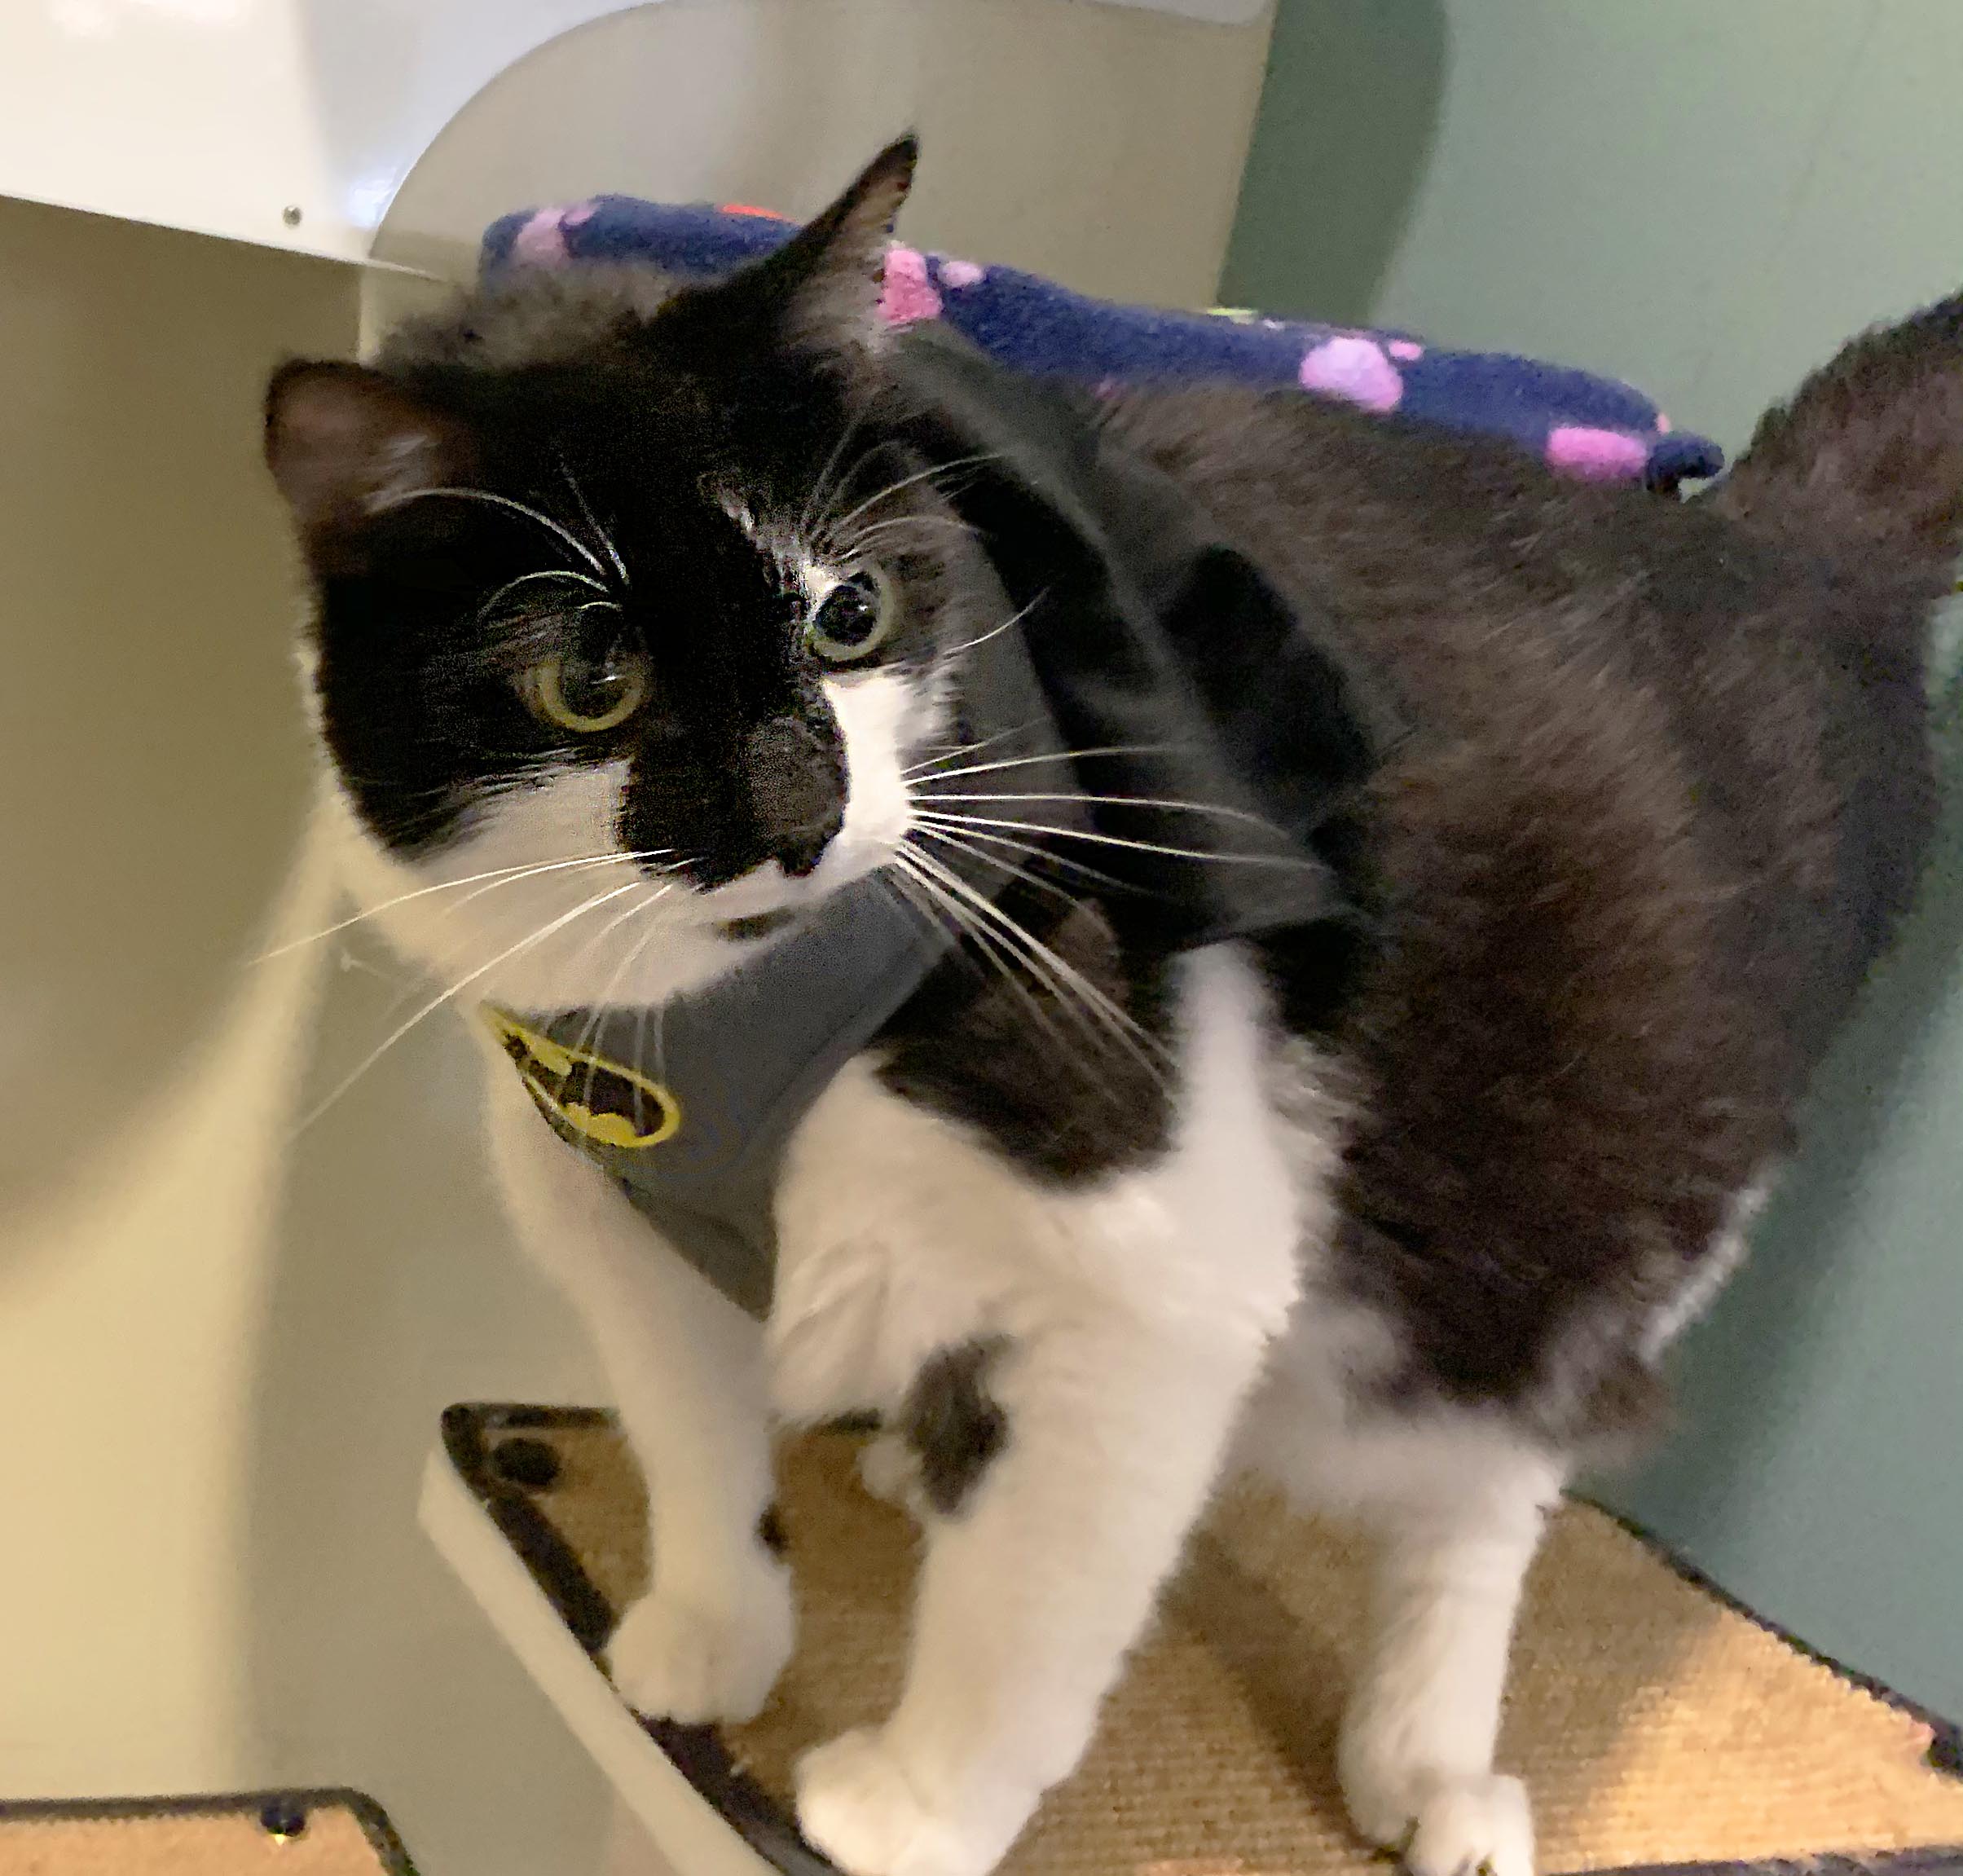 Mister The Cat Is Up For Adoption At The MDSPCA CBS Baltimore